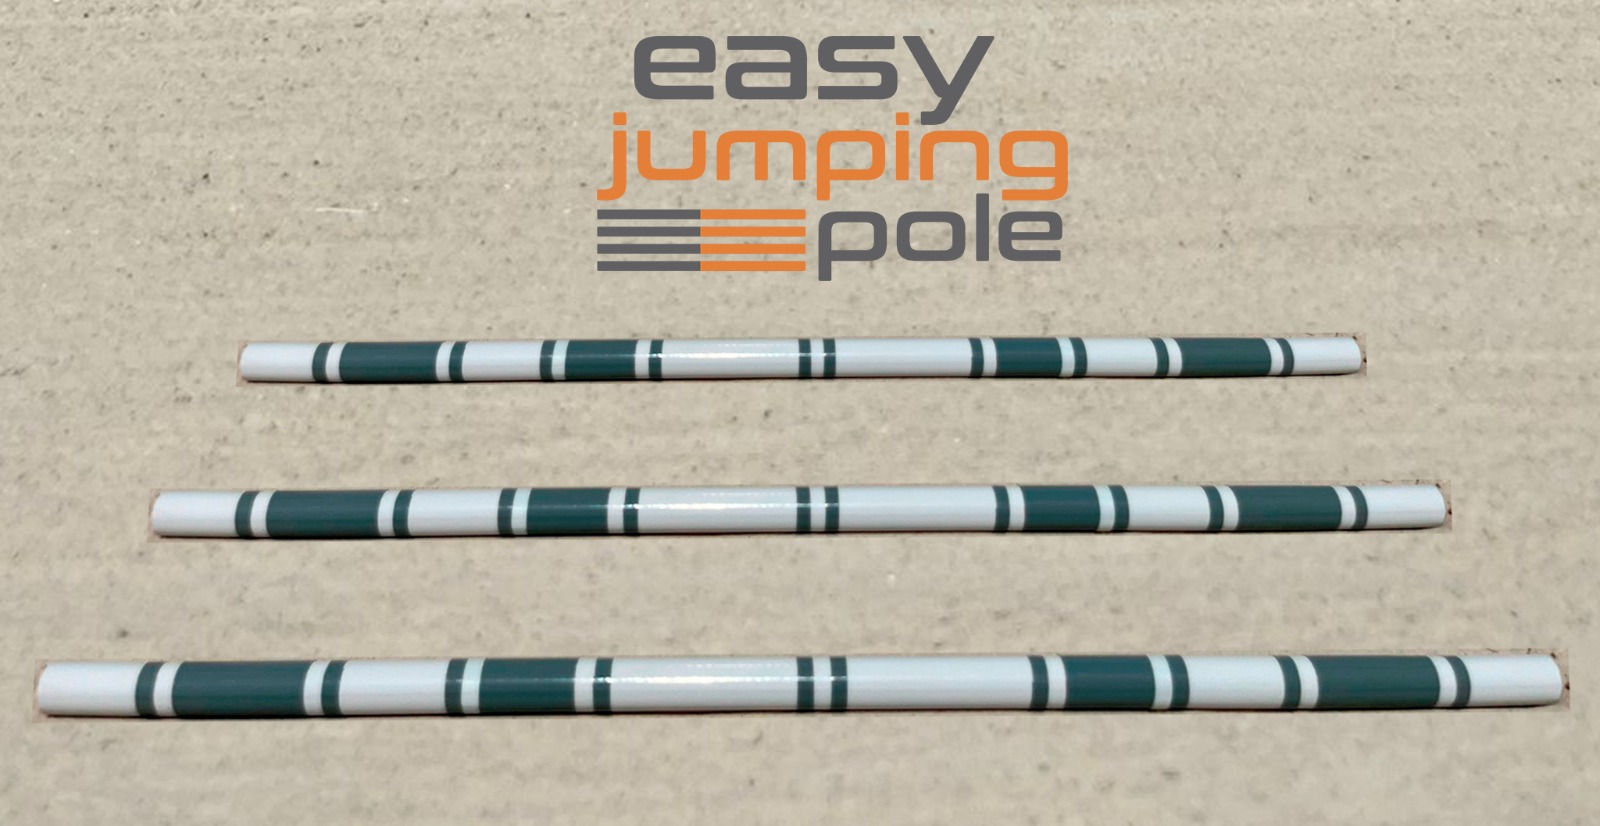 Easy jumping pole Model A-10